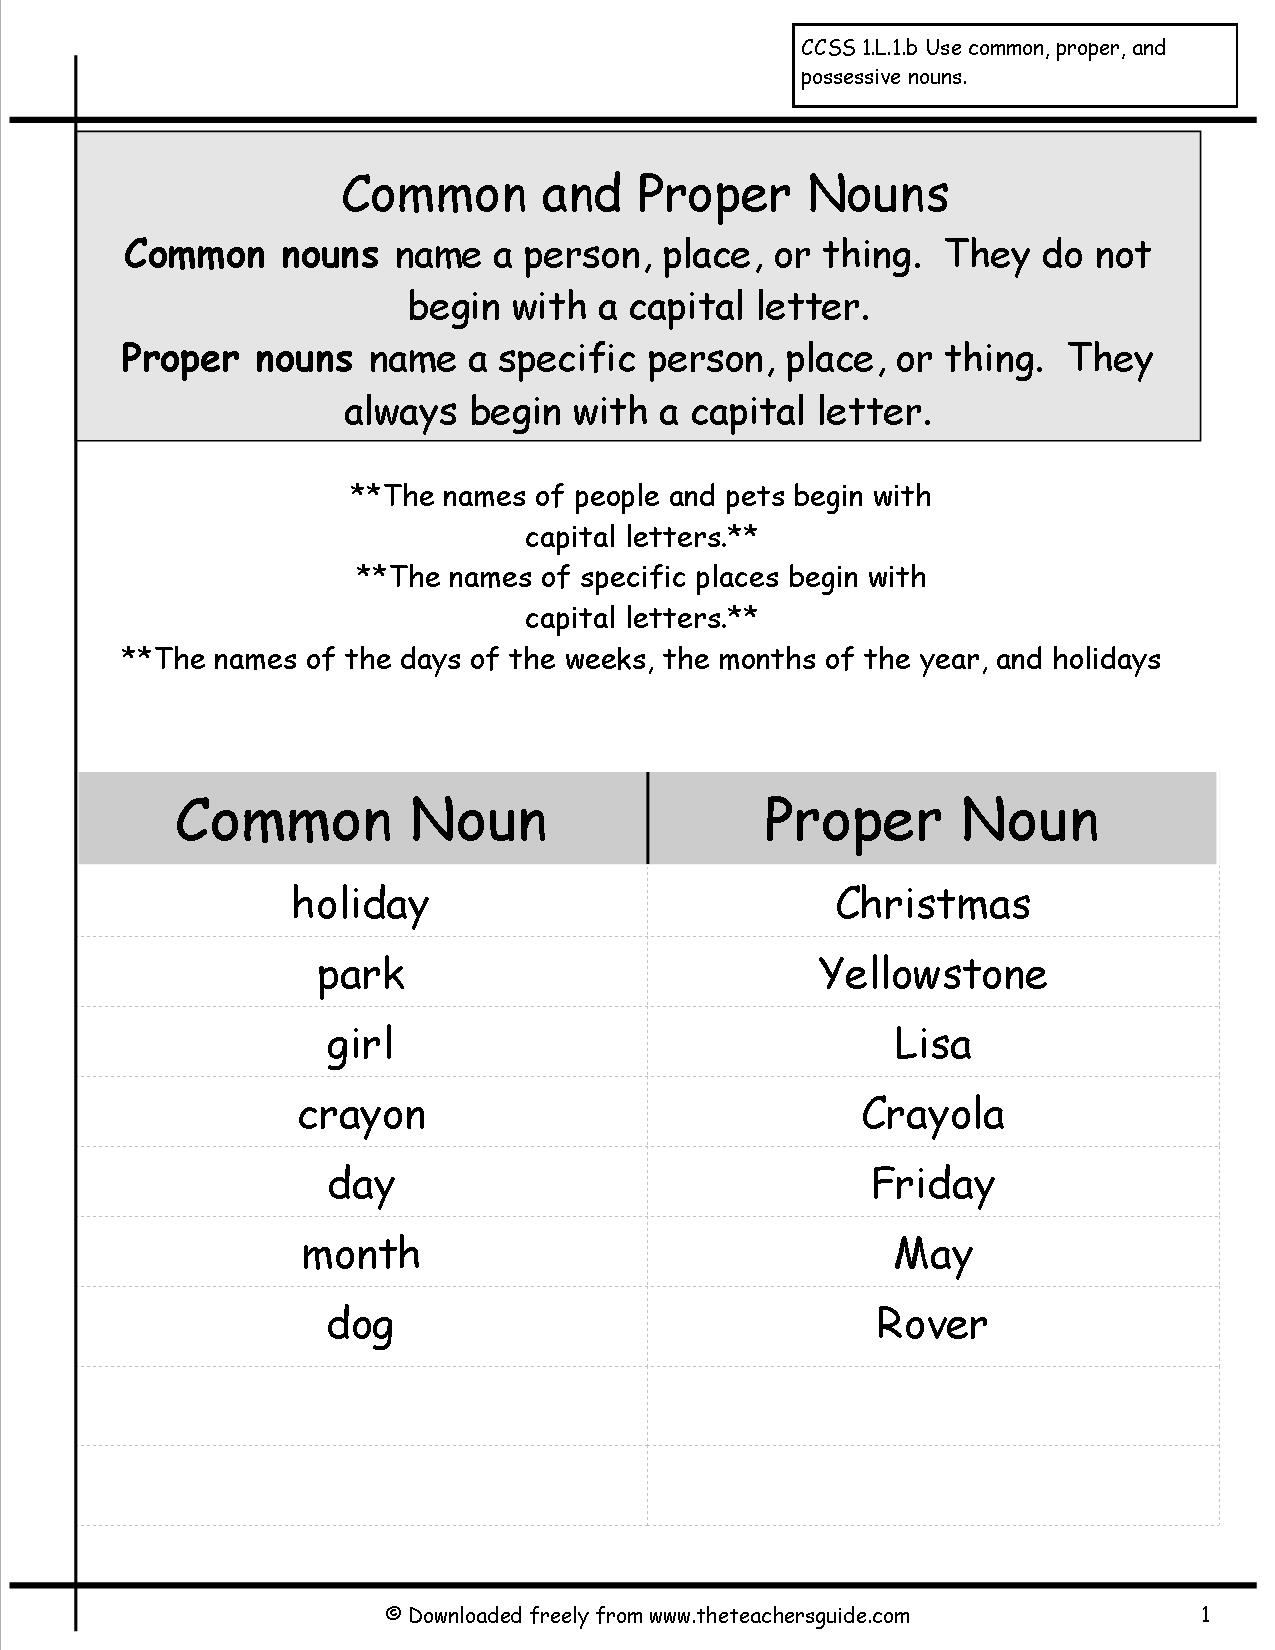 13-best-images-of-common-and-proper-nouns-worksheets-common-and